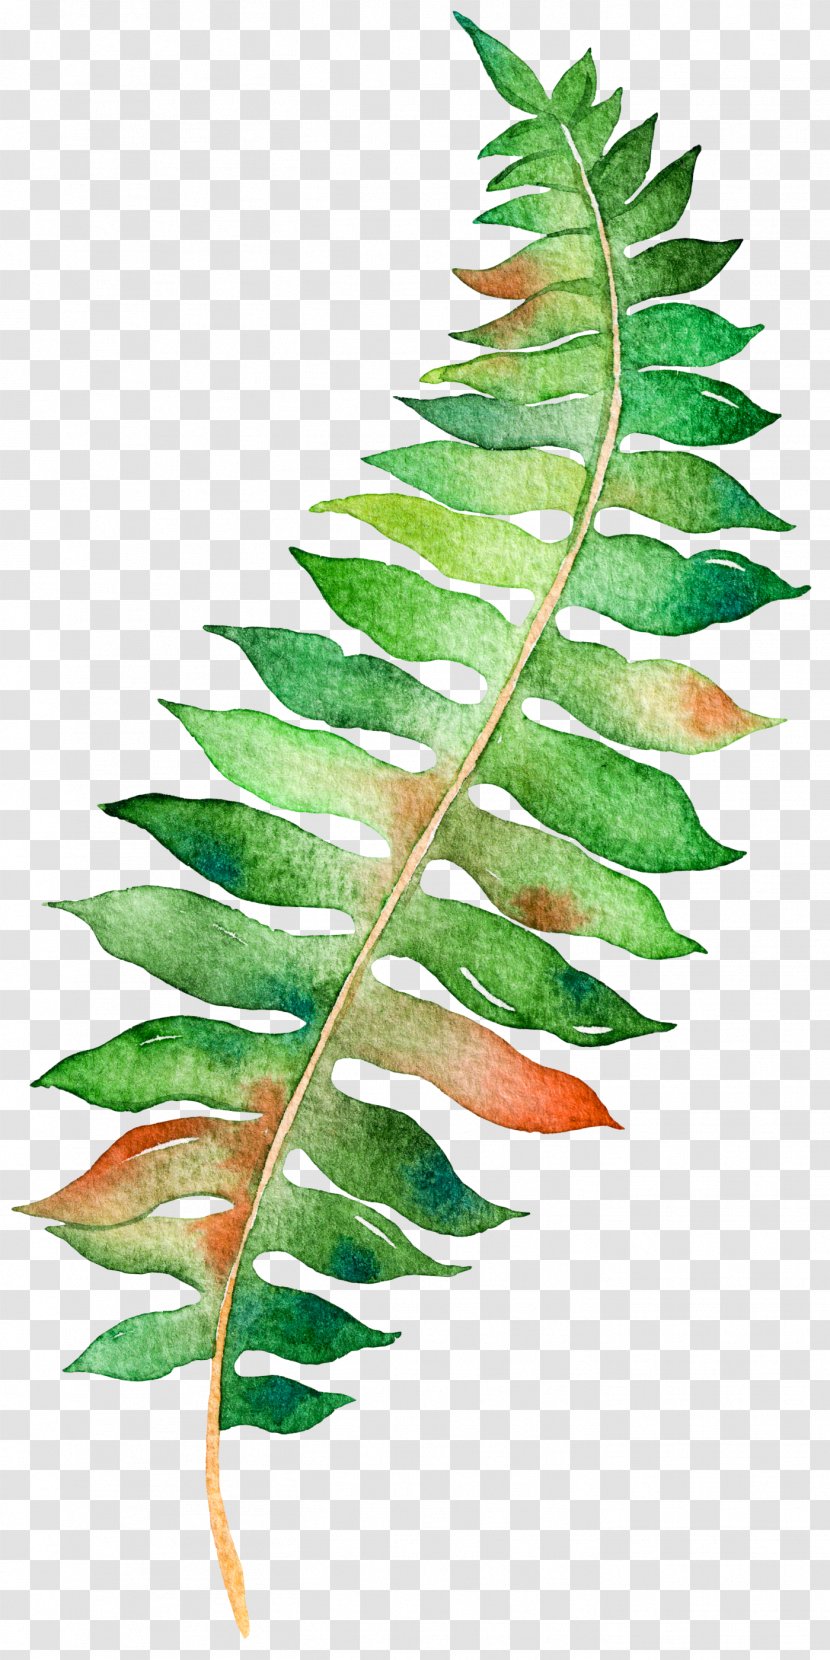 Paper Poster Watercolor Painting Illustration - Standard Size - Leaves Transparent PNG